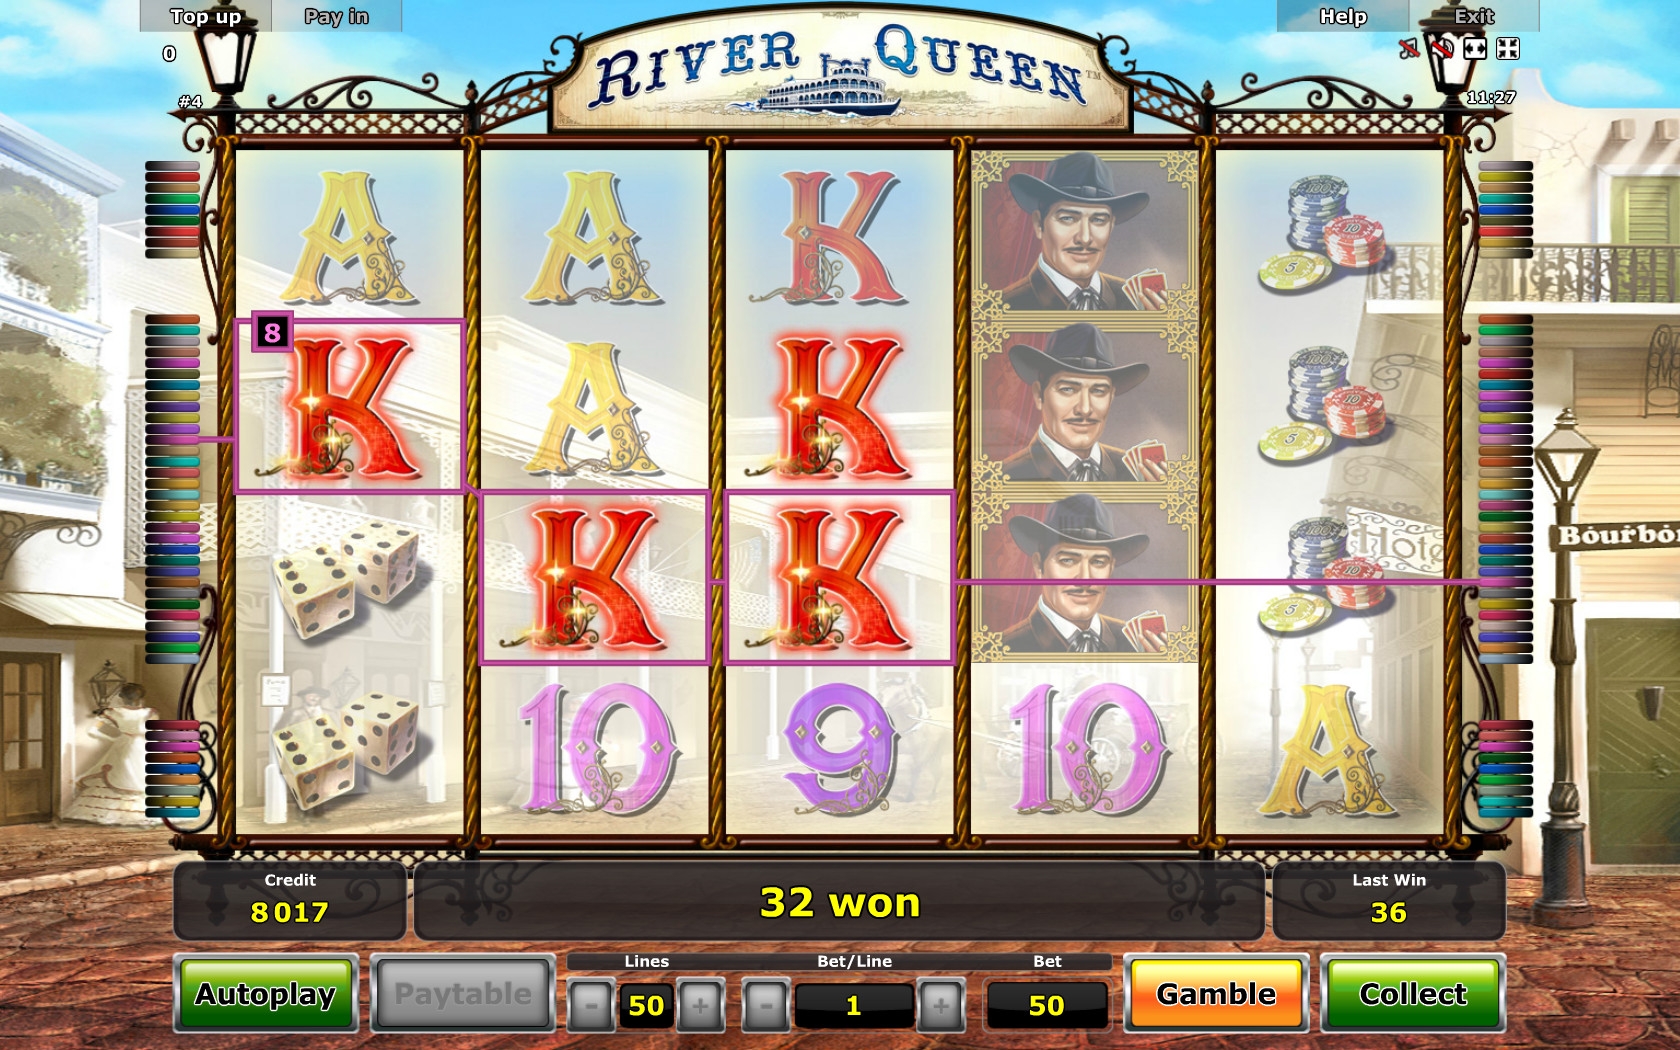 River Queen (River Queen) from category Slots